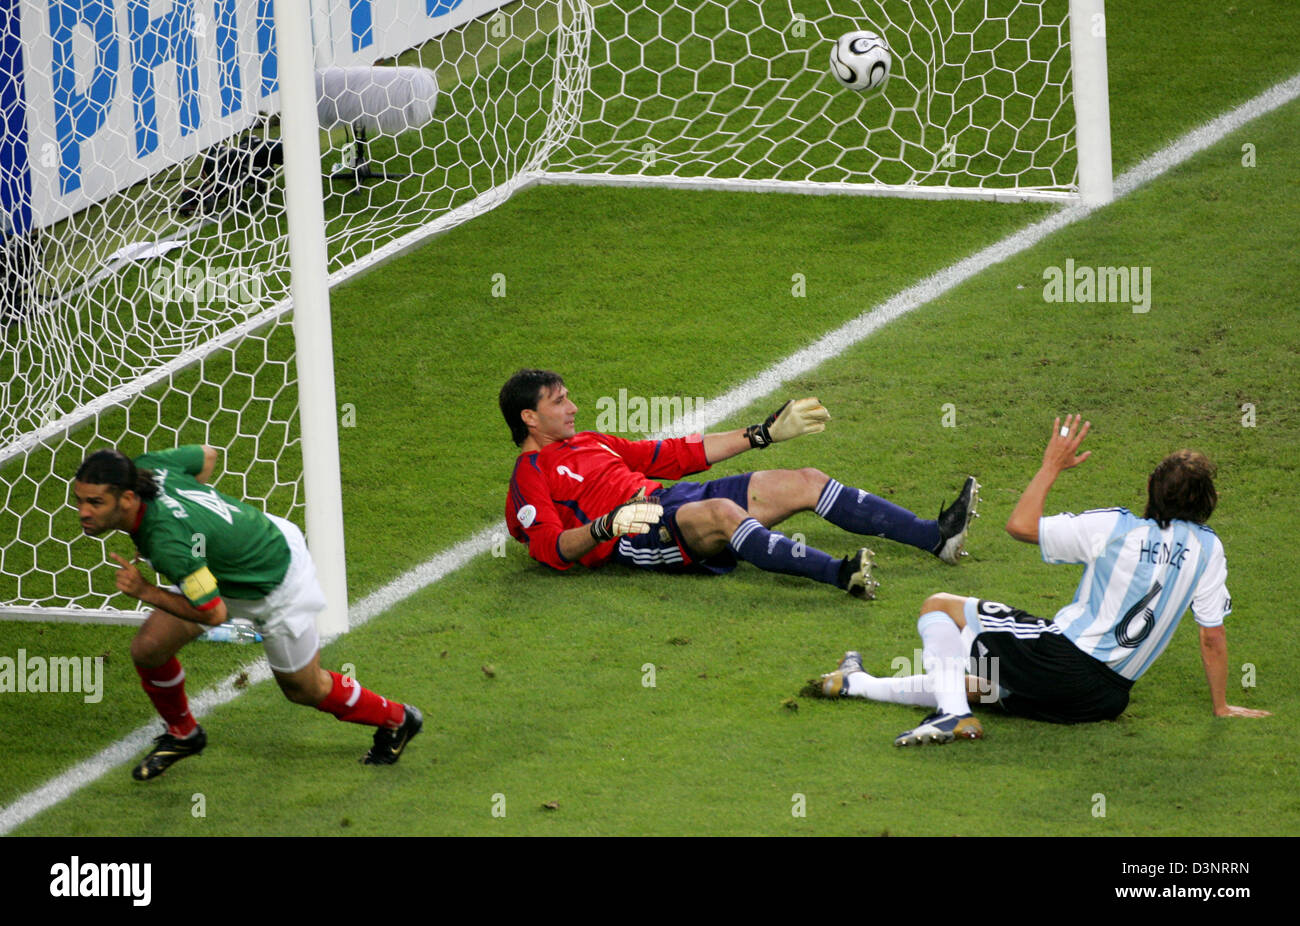 Rafael Marquez (L) of Mexico scores the 1-0 lead in the 2006 FIFA World Cup Round of 16 match Argentina vs Mexico at the FIFA World Cup stadium in Leipzig, Germany, Saturday 24 June 2006. Argentinian Gabriel Heinze (R) and goalie Roberto Abbondazieri (C) lie helpless on the grass. DPA/JAN WOITAS +++ Mobile Services OUT +++ Please refer to FIFA's Terms and Conditions. +++(c) dpa - B Stock Photo